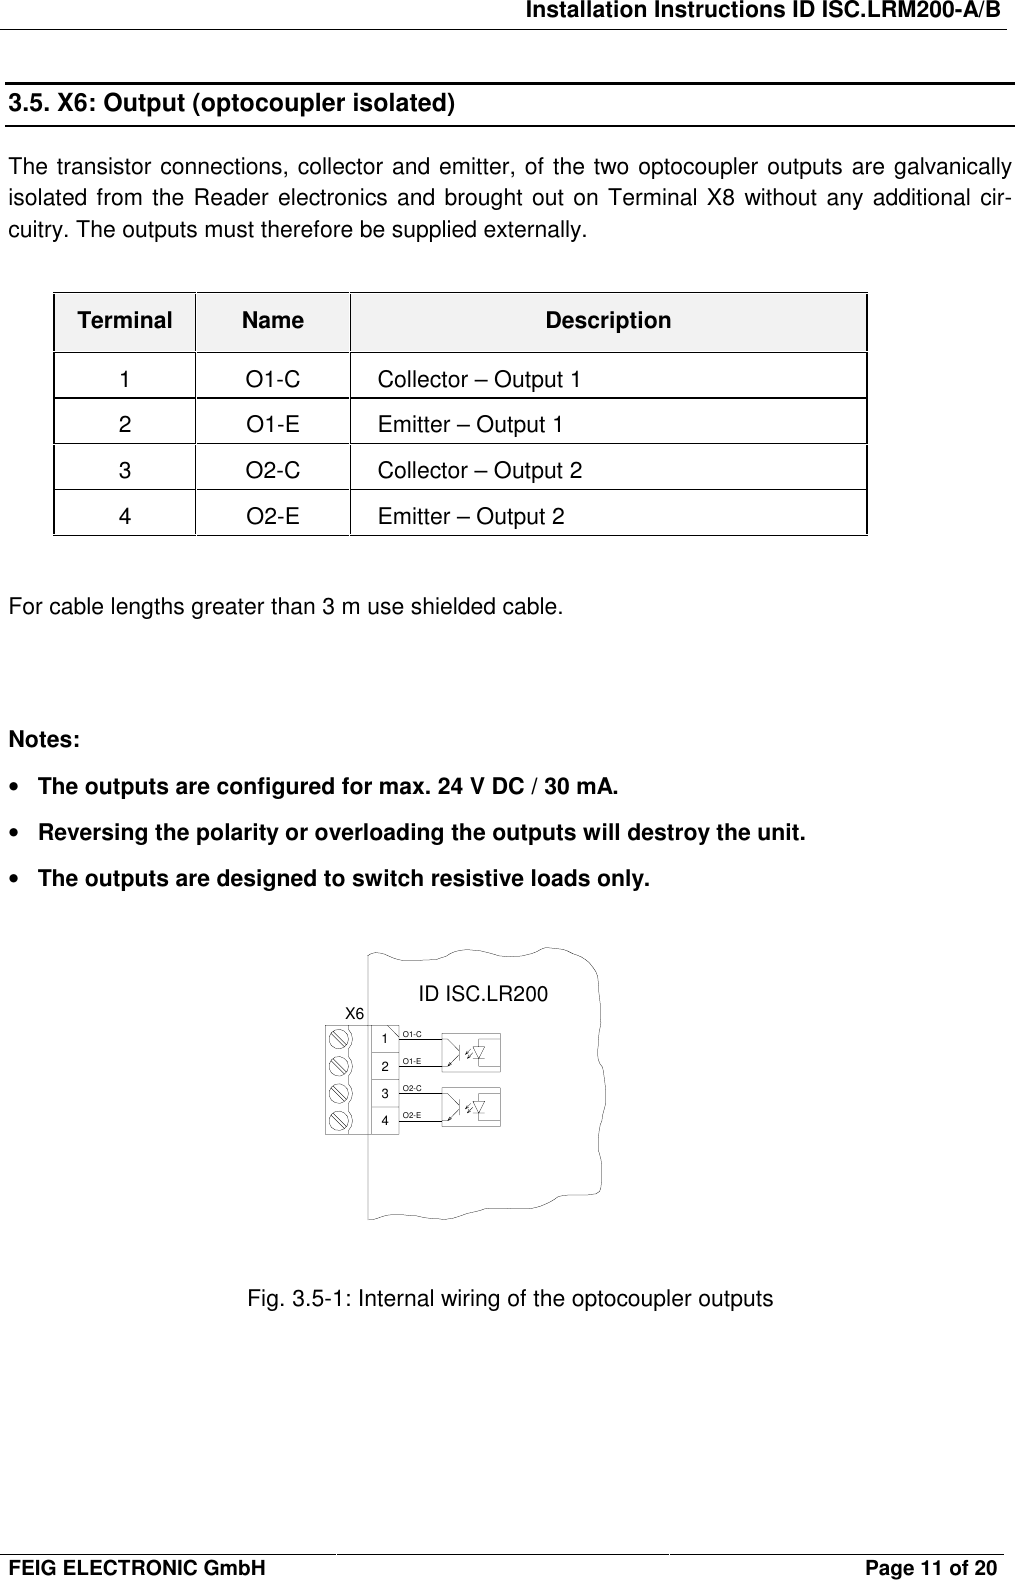 Installation Instructions ID ISC.LRM200-A/BFEIG ELECTRONIC GmbH Page 11 of 203.5. X6: Output (optocoupler isolated)The transistor connections, collector and emitter, of the two optocoupler outputs are galvanicallyisolated from the Reader electronics and brought out on Terminal X8 without any additional cir-cuitry. The outputs must therefore be supplied externally.Terminal Name Description1O1-CCollector – Output 12 O1-E Emitter – Output 13 O2-C Collector – Output 24 O2-E Emitter – Output 2For cable lengths greater than 3 m use shielded cable.Notes:• The outputs are configured for max. 24 V DC / 30 mA.• Reversing the polarity or overloading the outputs will destroy the unit.• The outputs are designed to switch resistive loads only.Fig. 3.5-1: Internal wiring of the optocoupler outputsX61234O1-CO1-EO2-CO2-EID ISC.LR200